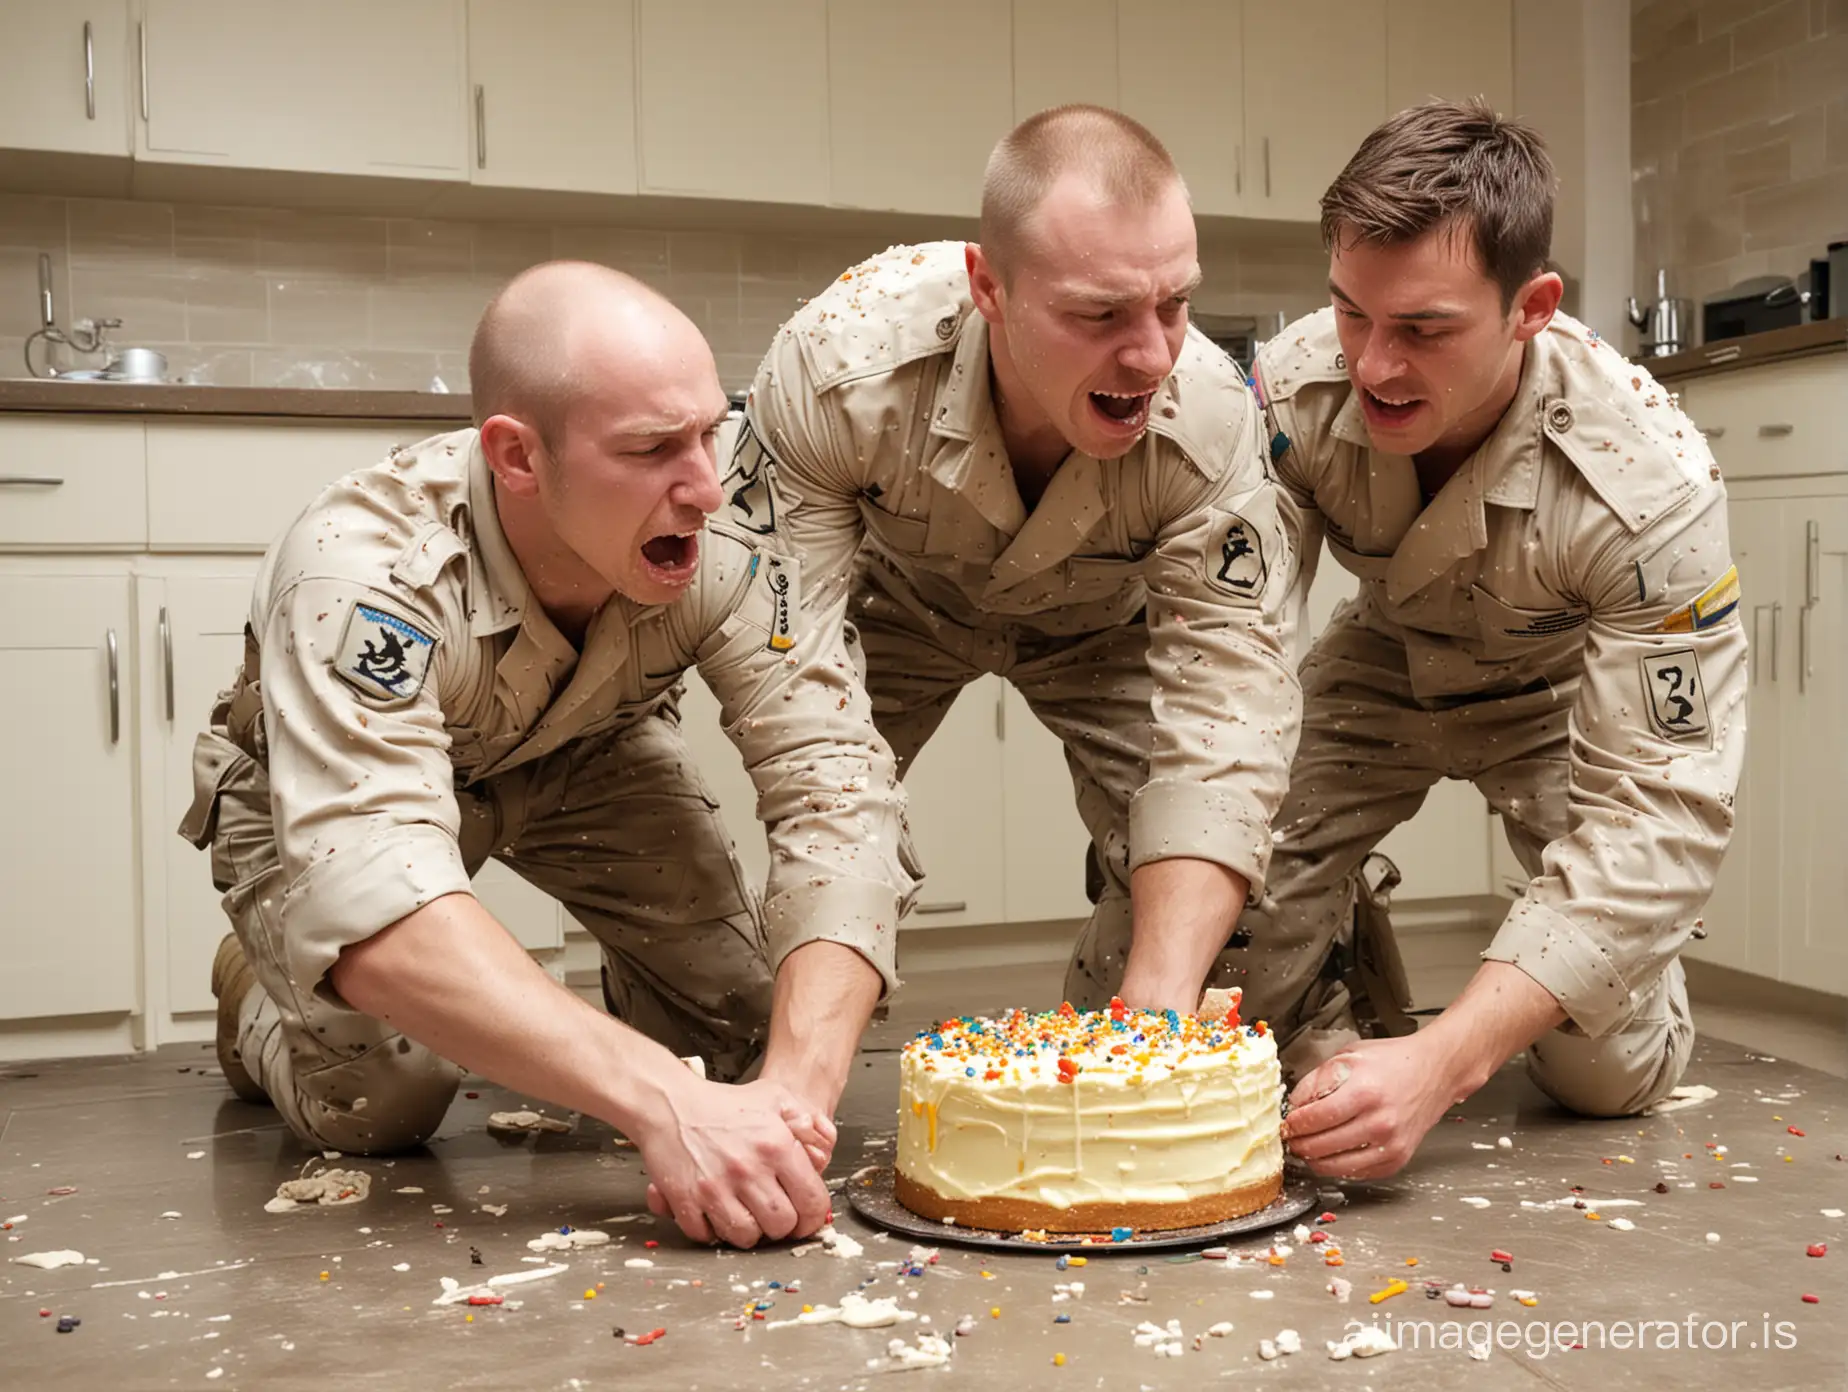 white men, two uniformed soldier wrestling and fighting, gay, cake fighting, body crushes the cake, the ass crushes the cake, in kitchen, impacts cake, hits cake, cake in ruin, face in cake, atractive face, wet dirty, uniform covered in cake and cream, fighting and wrestling, fist fight, pressing your face into the cake and cream, trampling the cake, back on the cake, back pocket, cake violence,